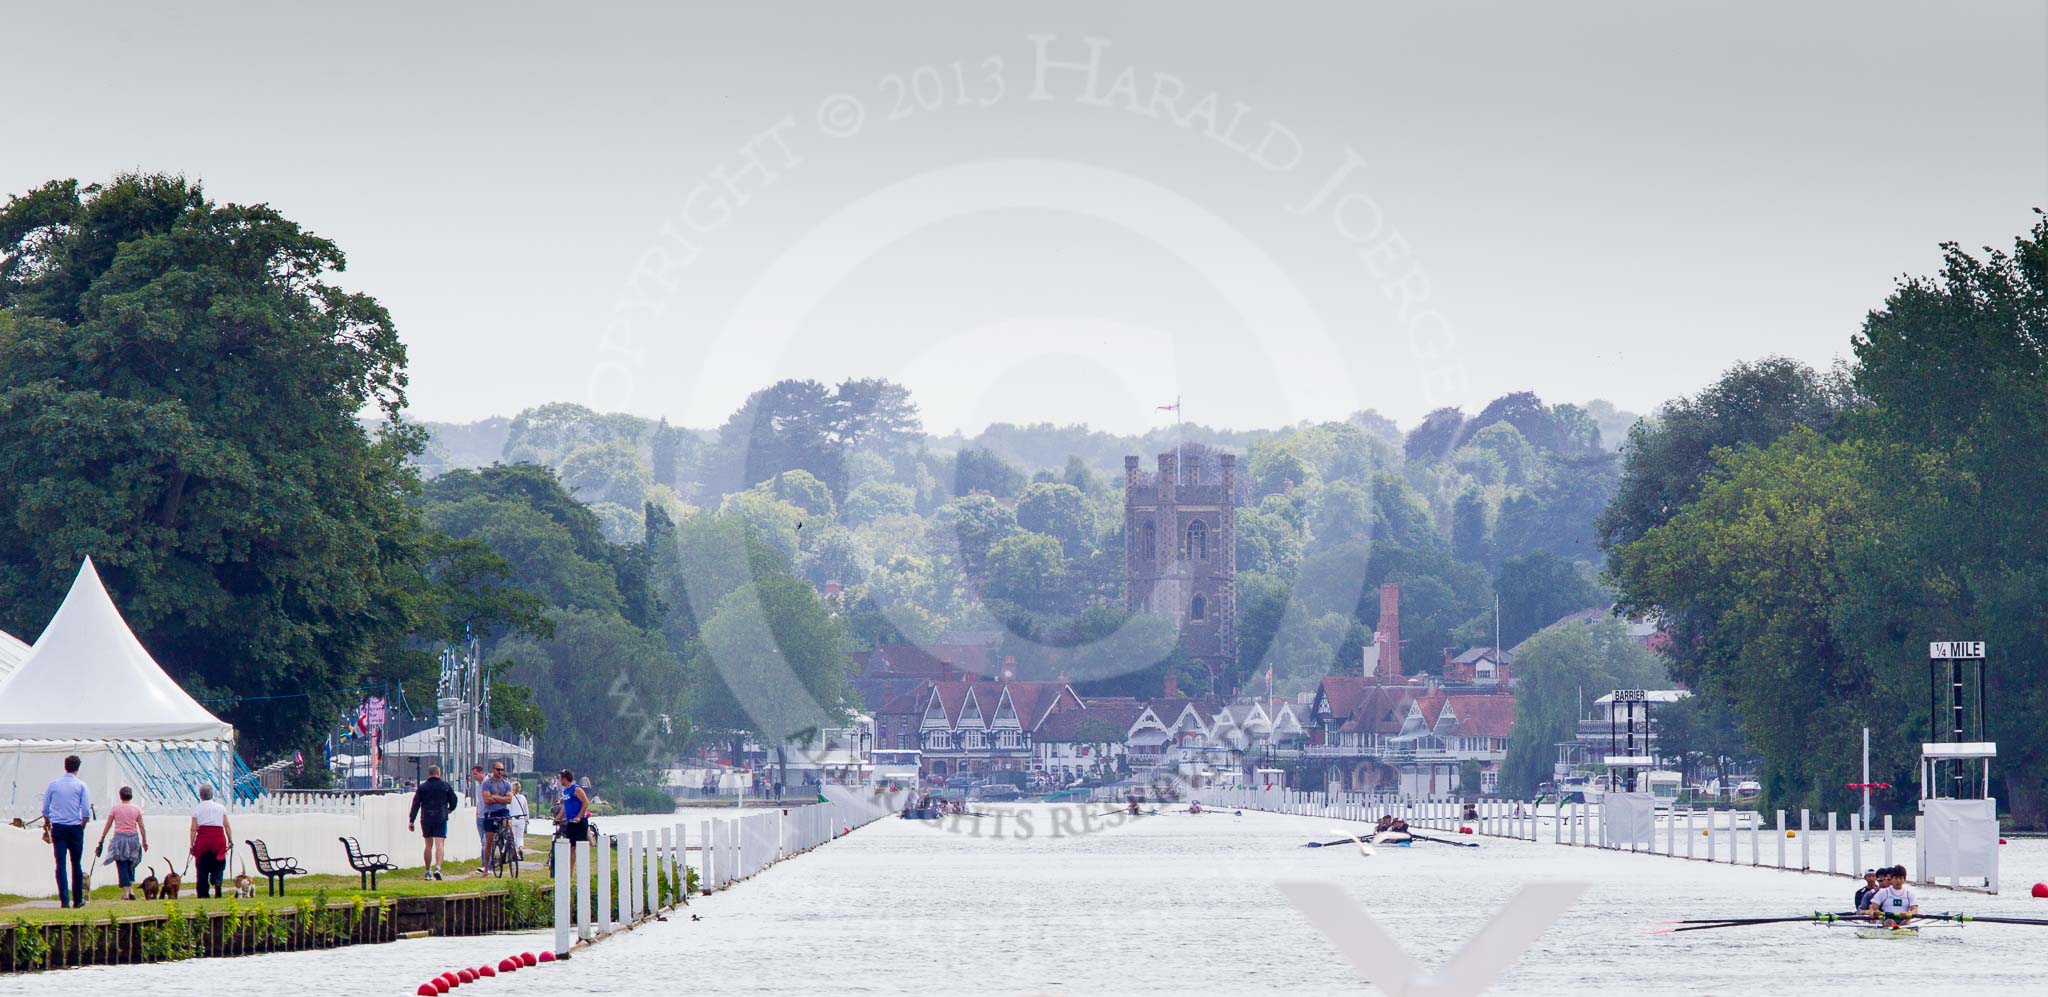 Henley Royal Regatta 2013 (Monday): The HRR race course seen from the start (the "Y" in the front of the image), looking towards the finish and the town of Henley-on-Thames..
River Thames between Henley and Temple Island,
Henley-on-Thames,
Berkshire,
United Kingdom,
on 01 July 2013 at 15:09, image #30